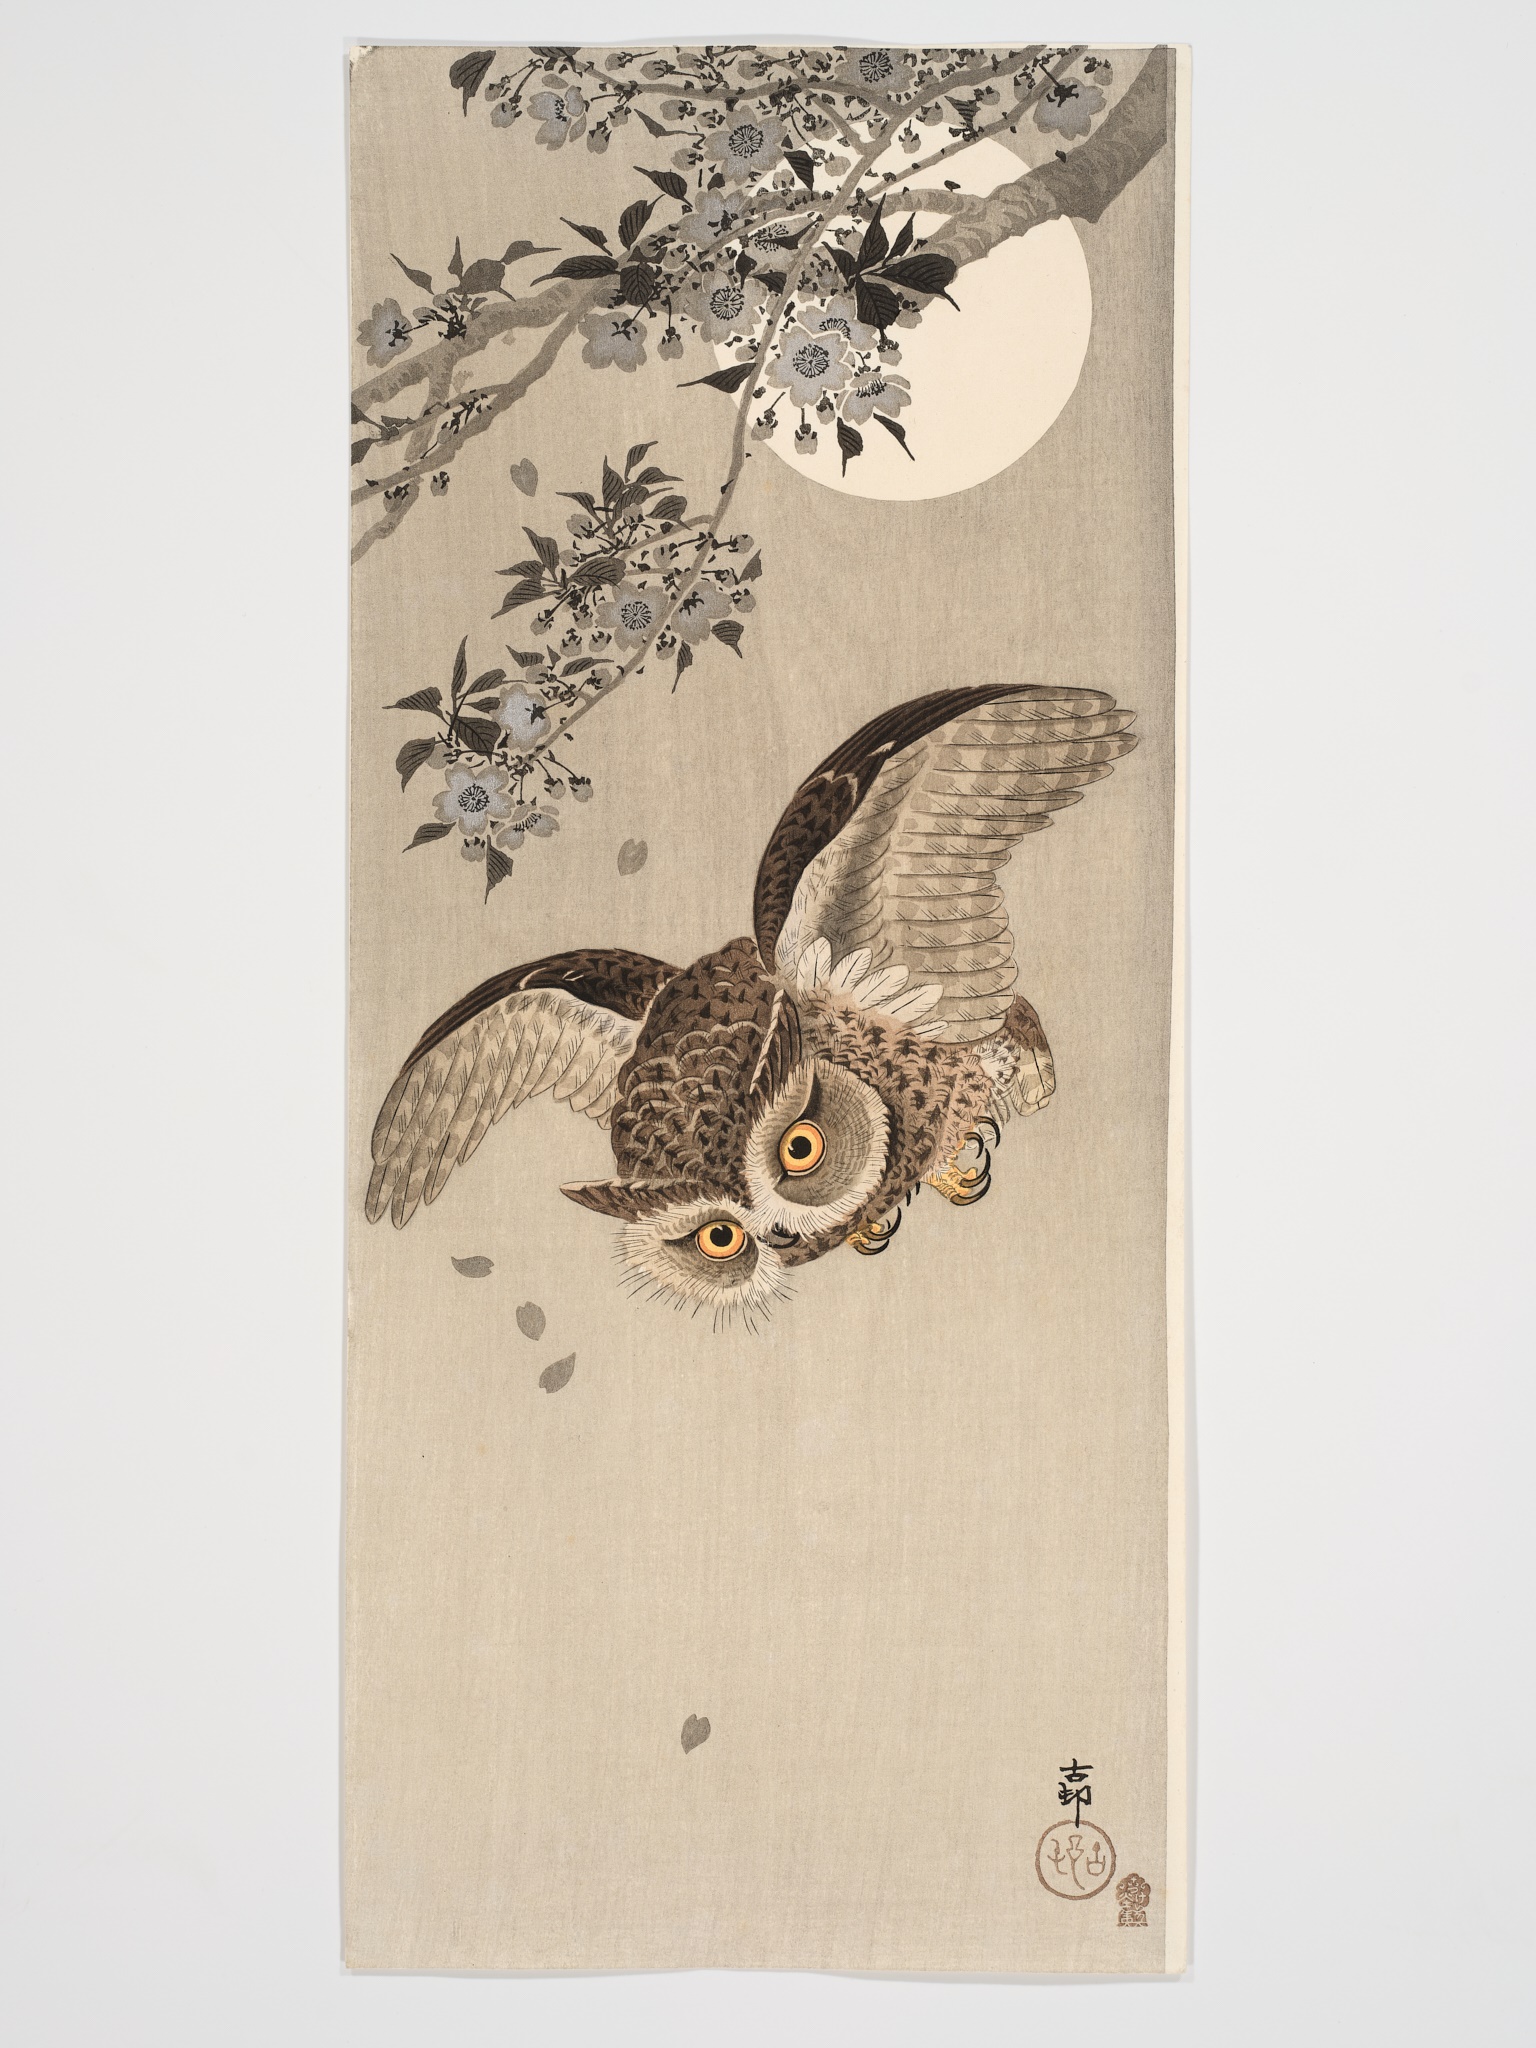 OHARA KOSON (1877-1945), SCOPS OWL IN FLIGHT, CHERRY BLOSSOMS AND FULL MOON - Image 4 of 6